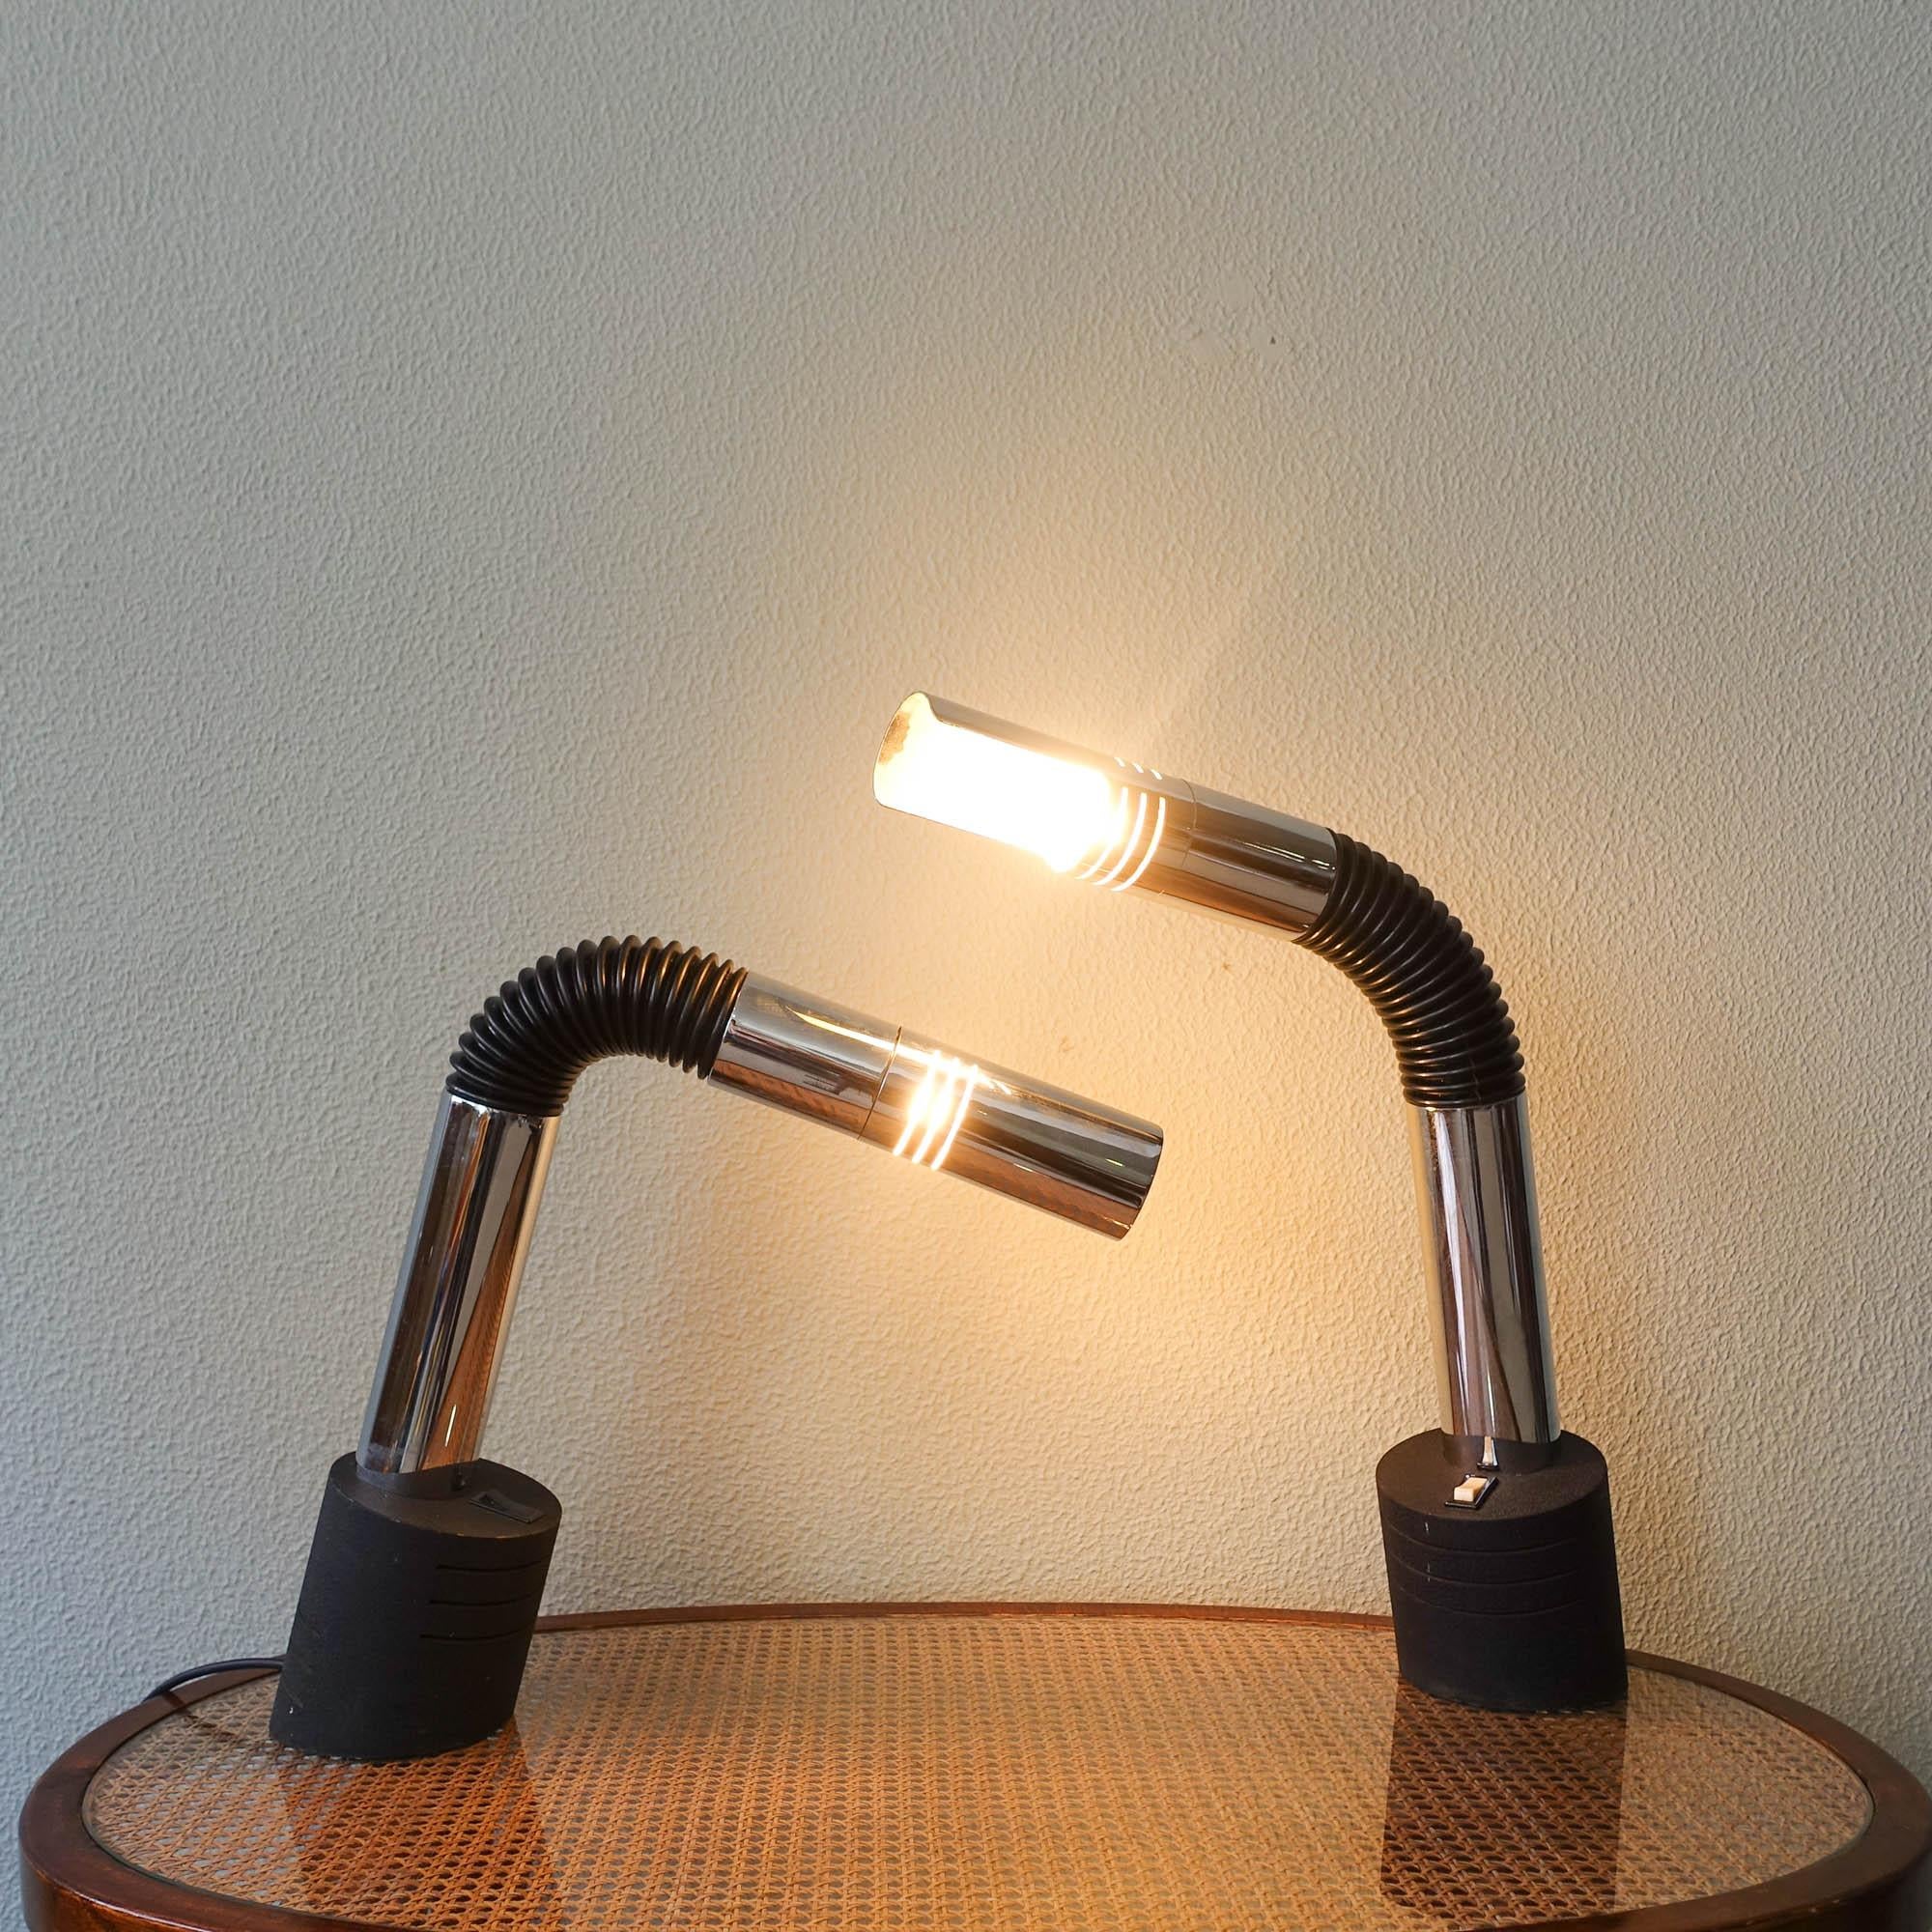 Late 20th Century Pair of “Elbow” Table Lamp by E. Bellini for Targetti Sankey, 1970s